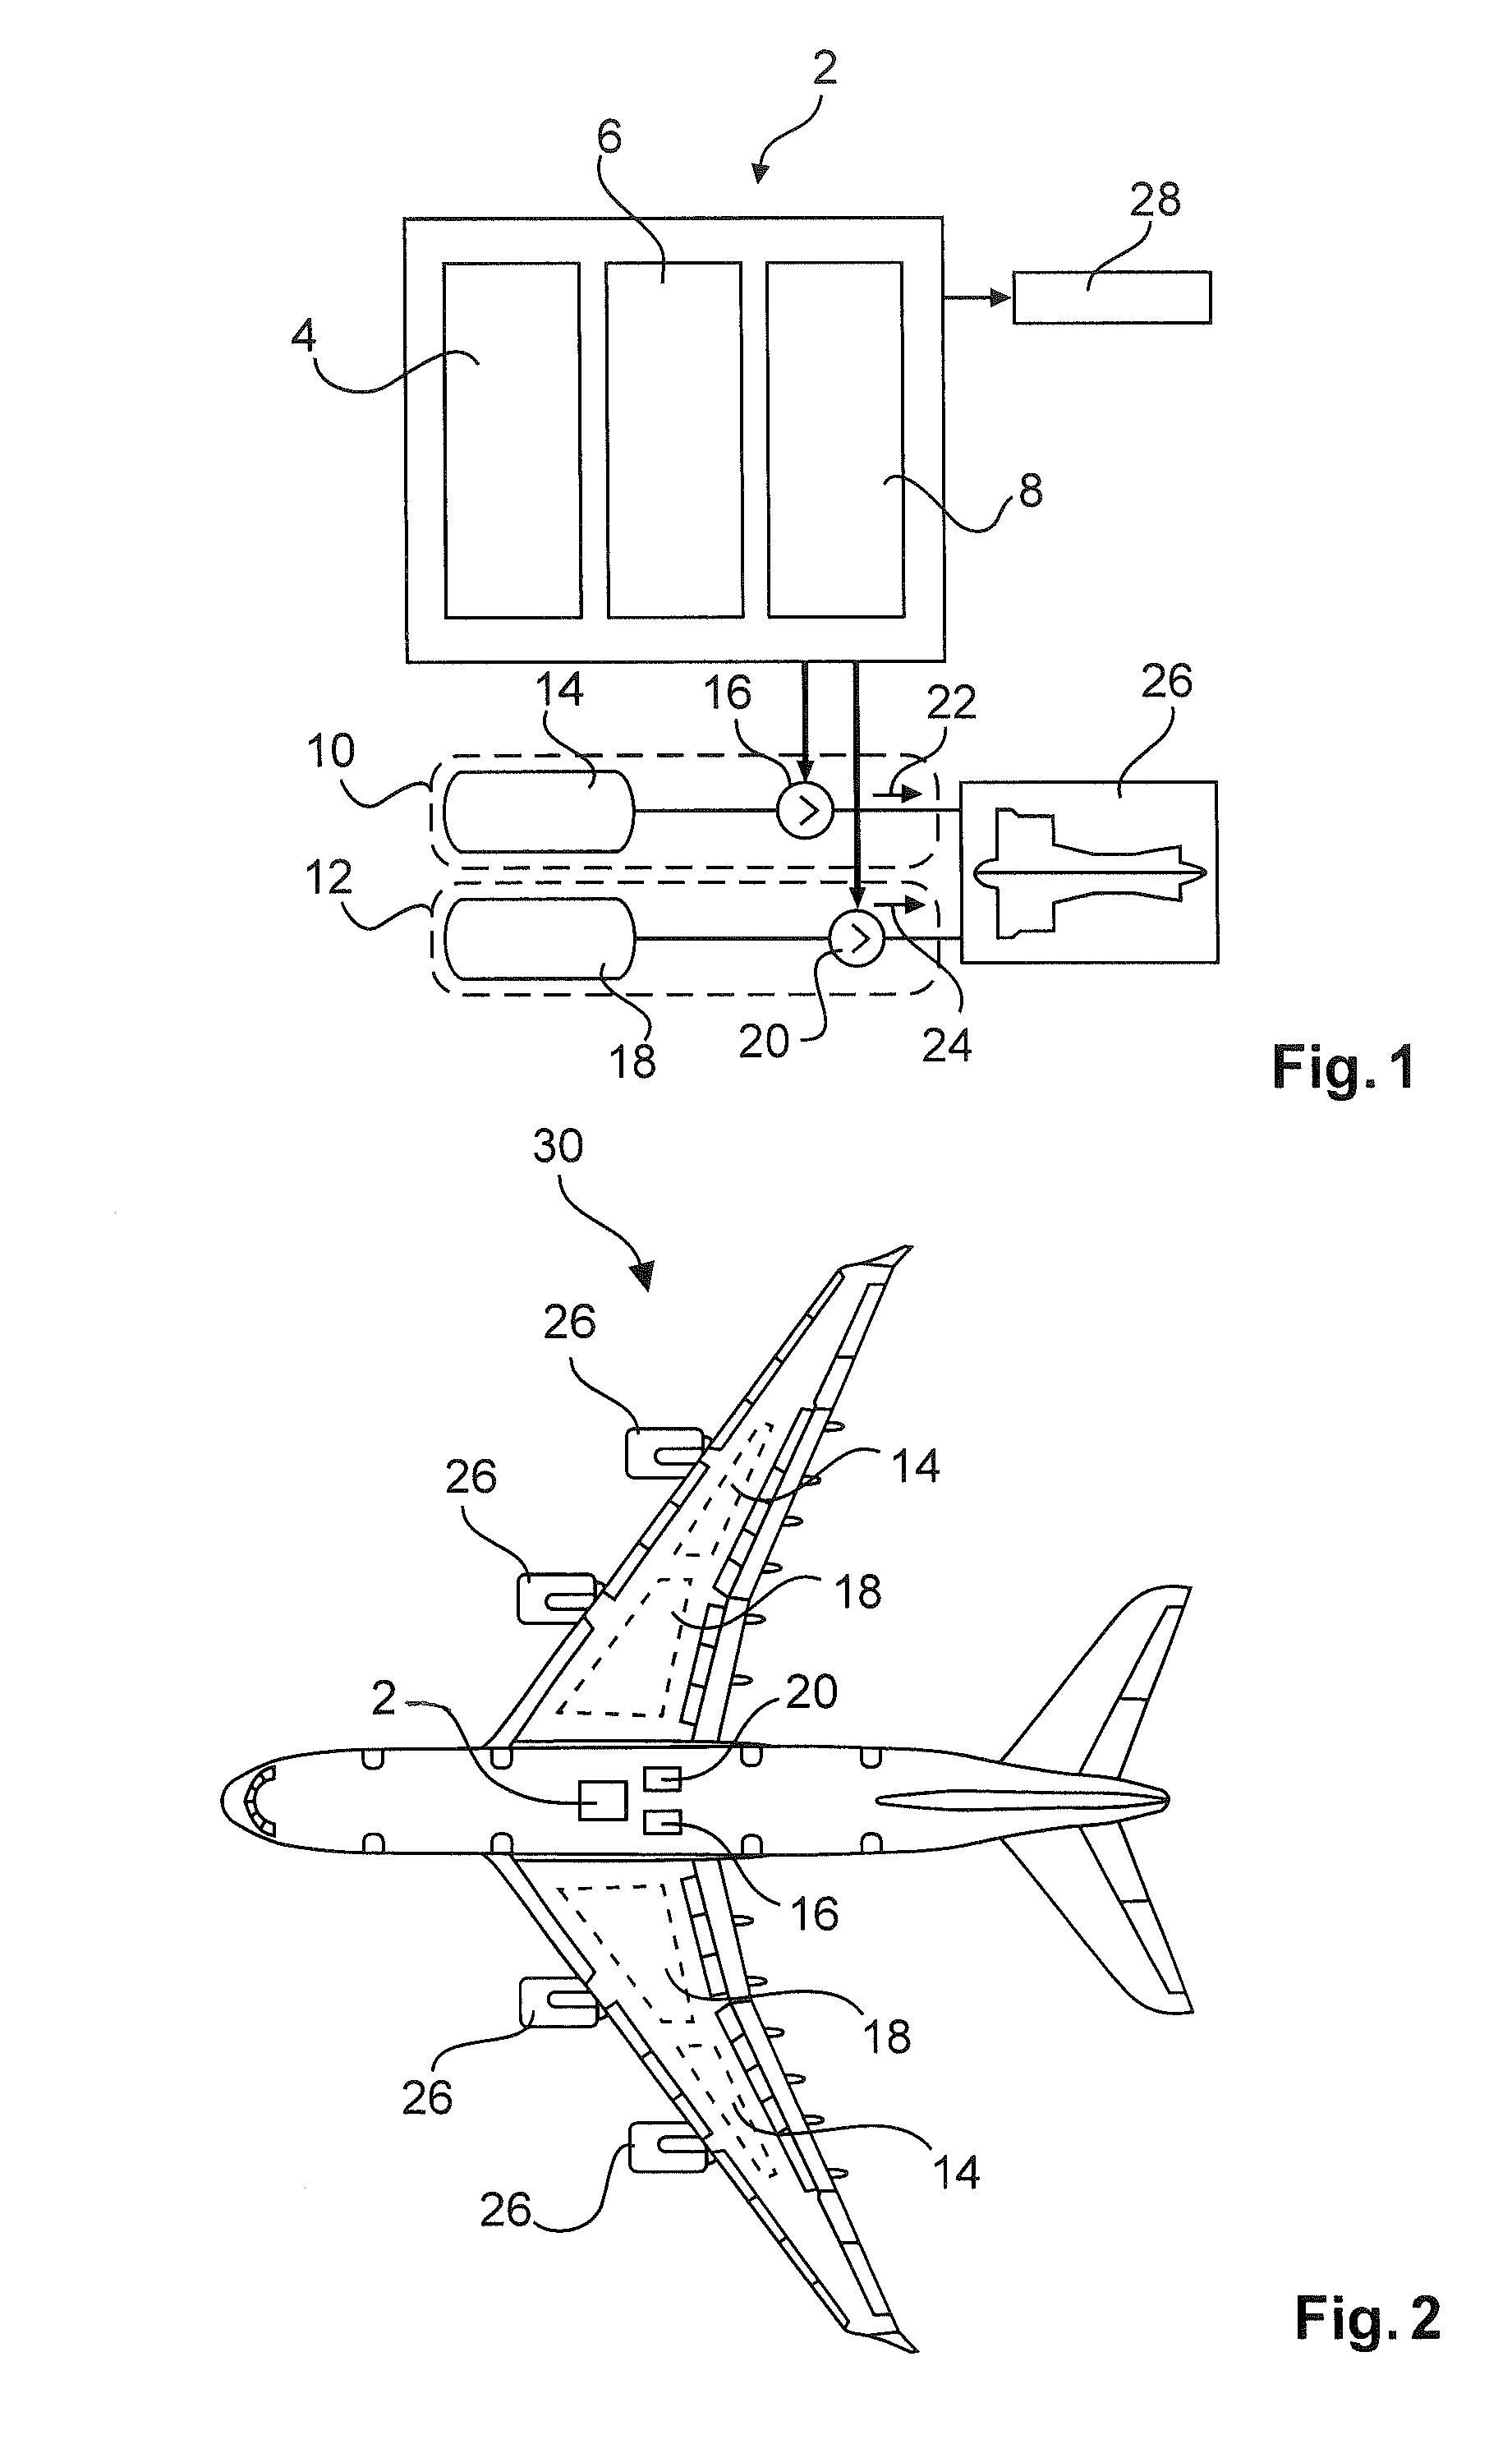 Control unit and method for controlling the supply of a vehicle with multiple fuels